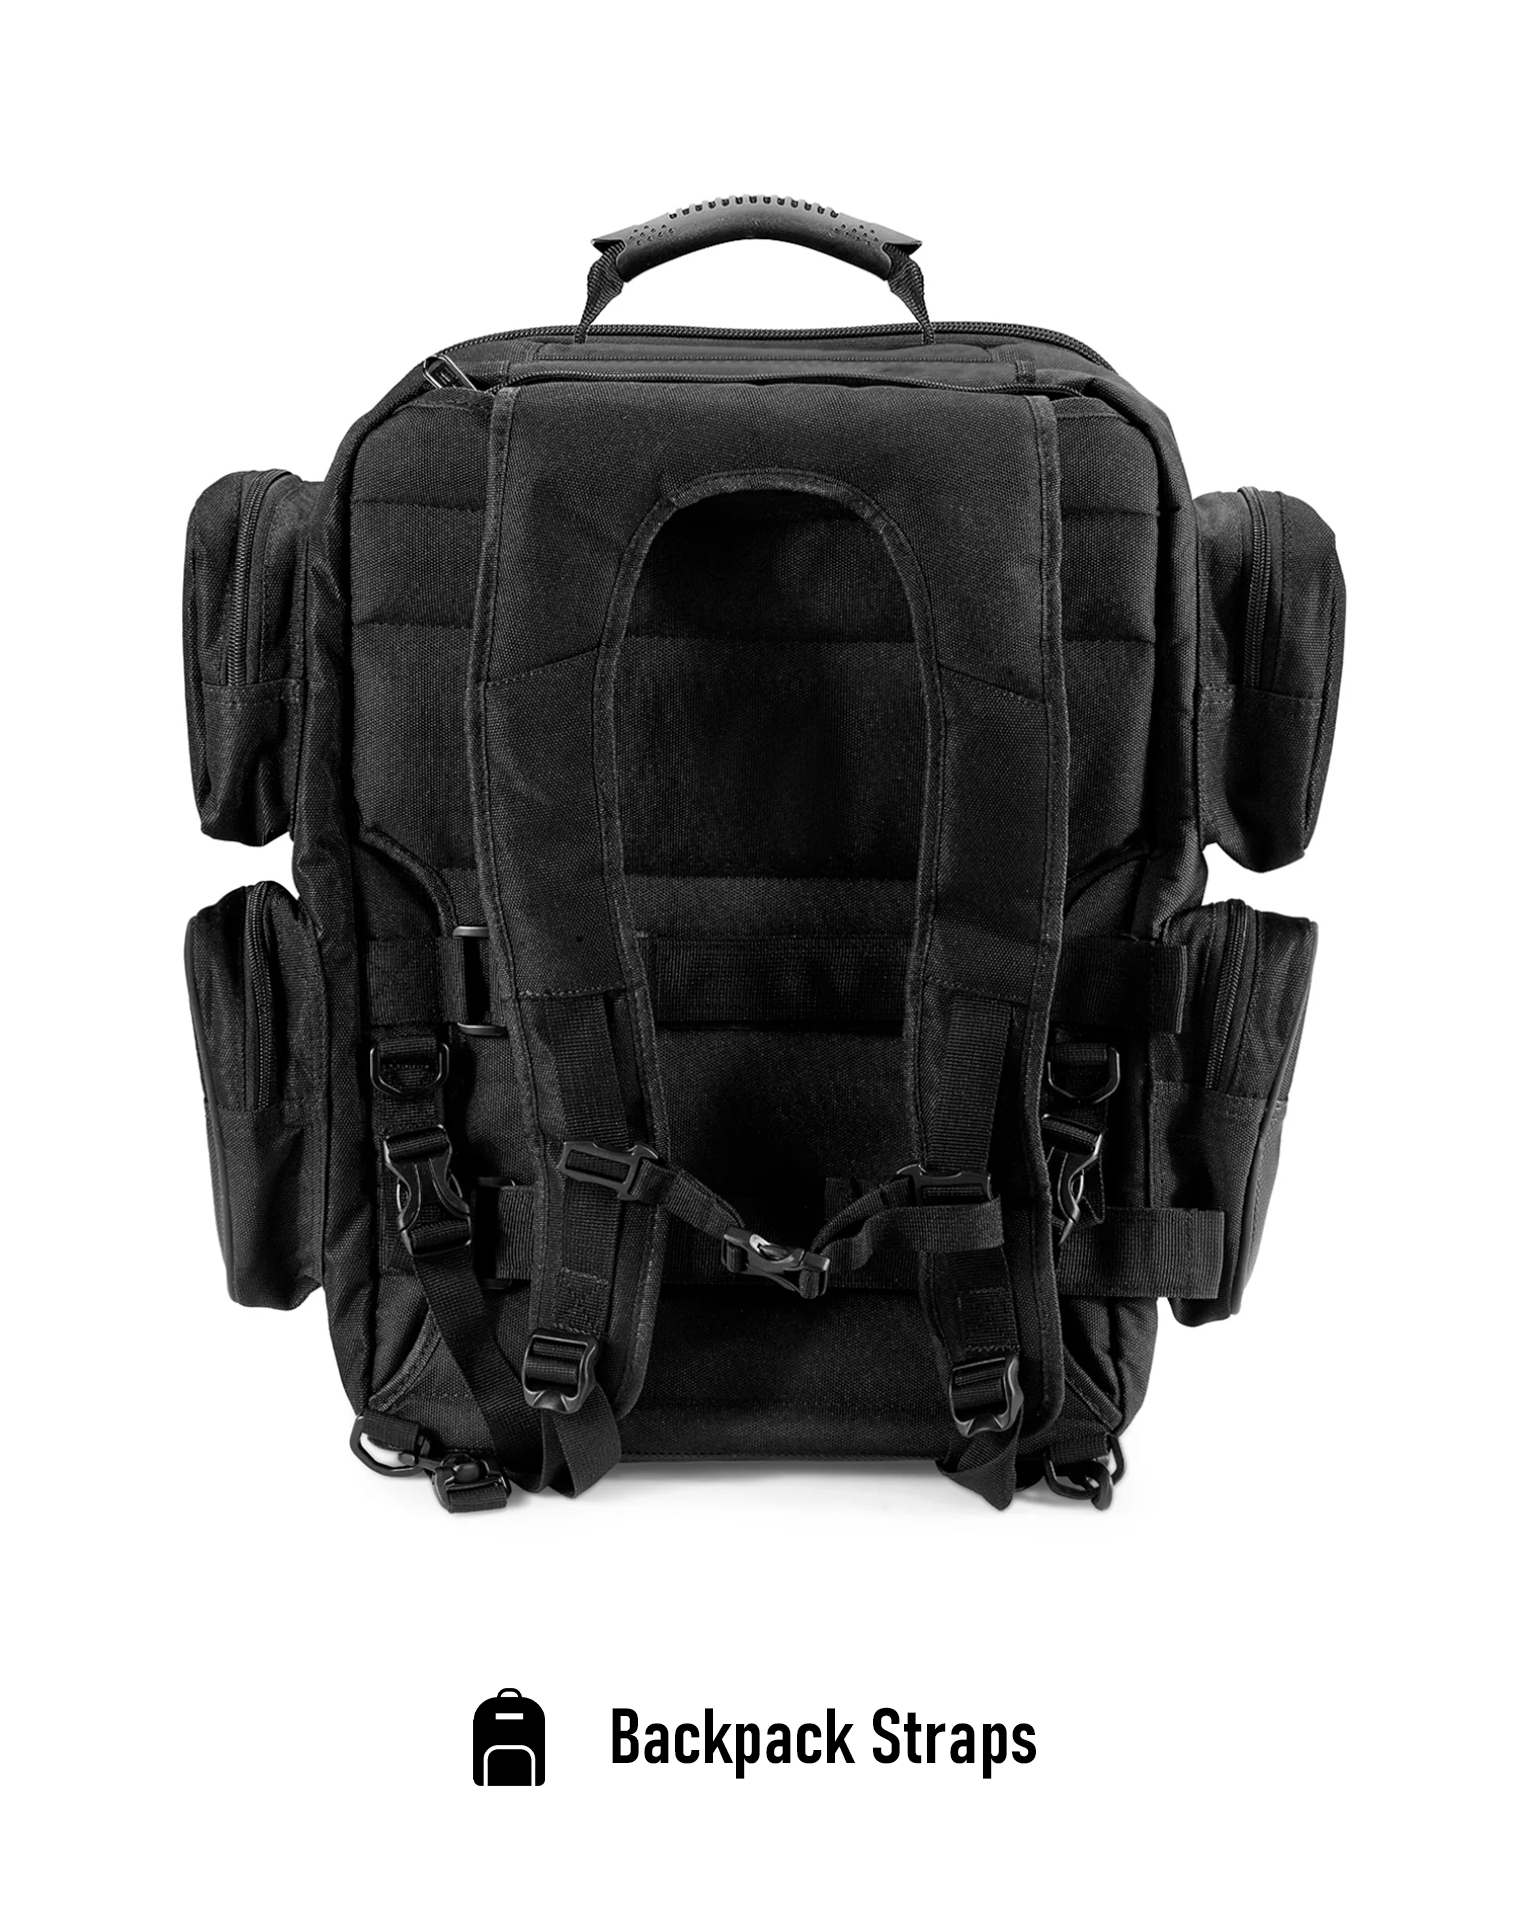 29L - Voyage Large Hyosung Motorcycle Backpack